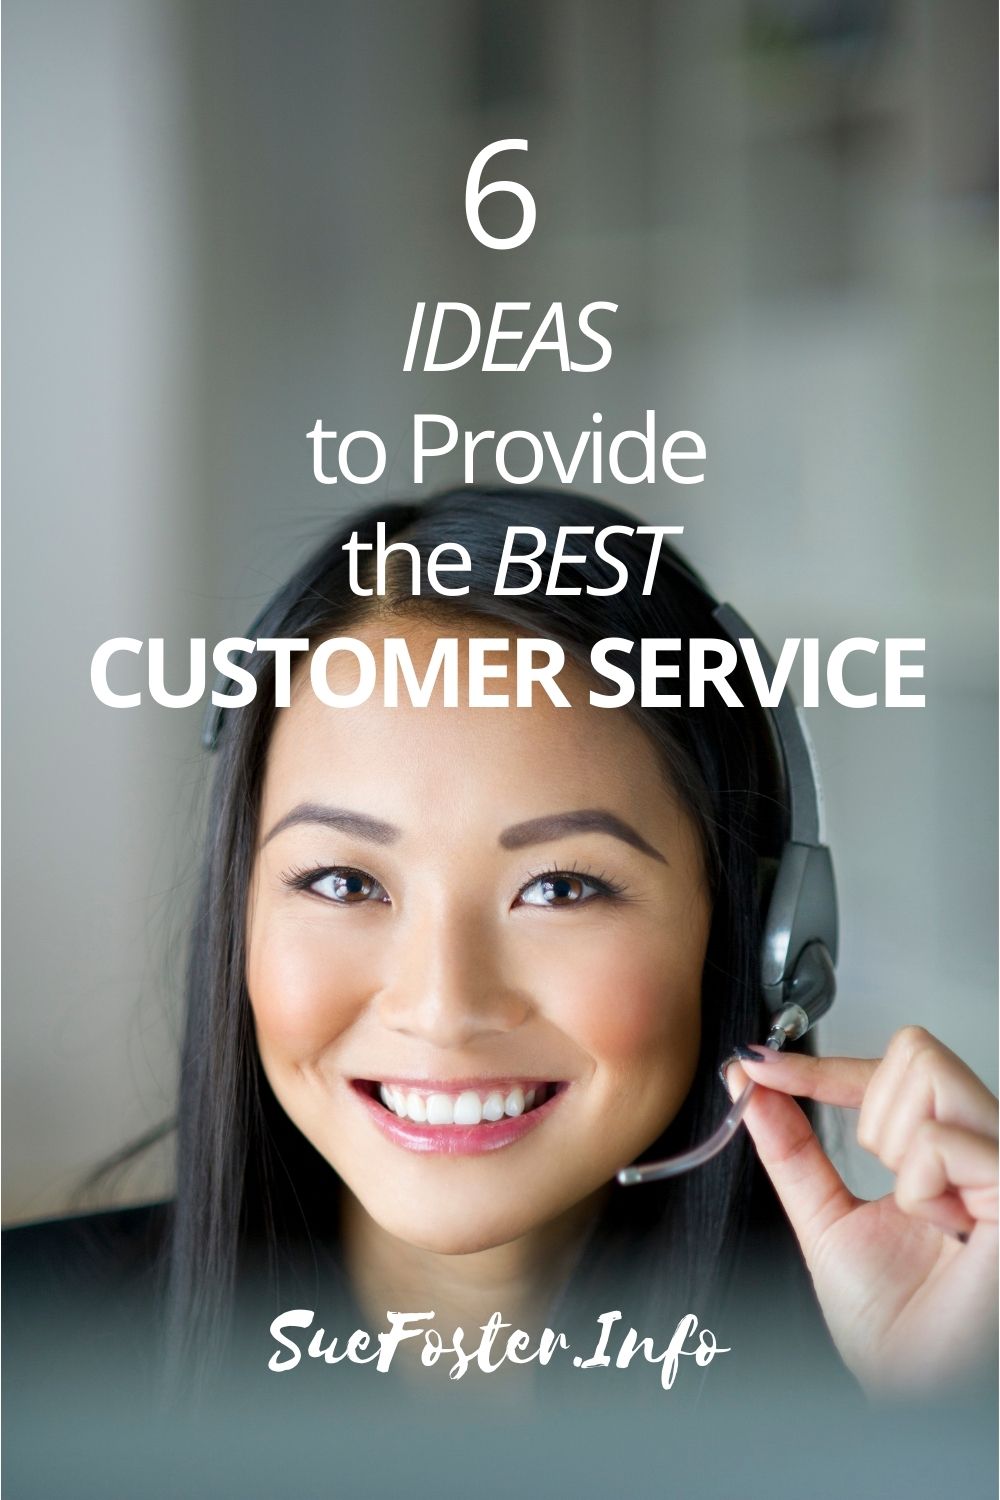 In order to provide the best customer service possible, you need to focus on these six ideas.